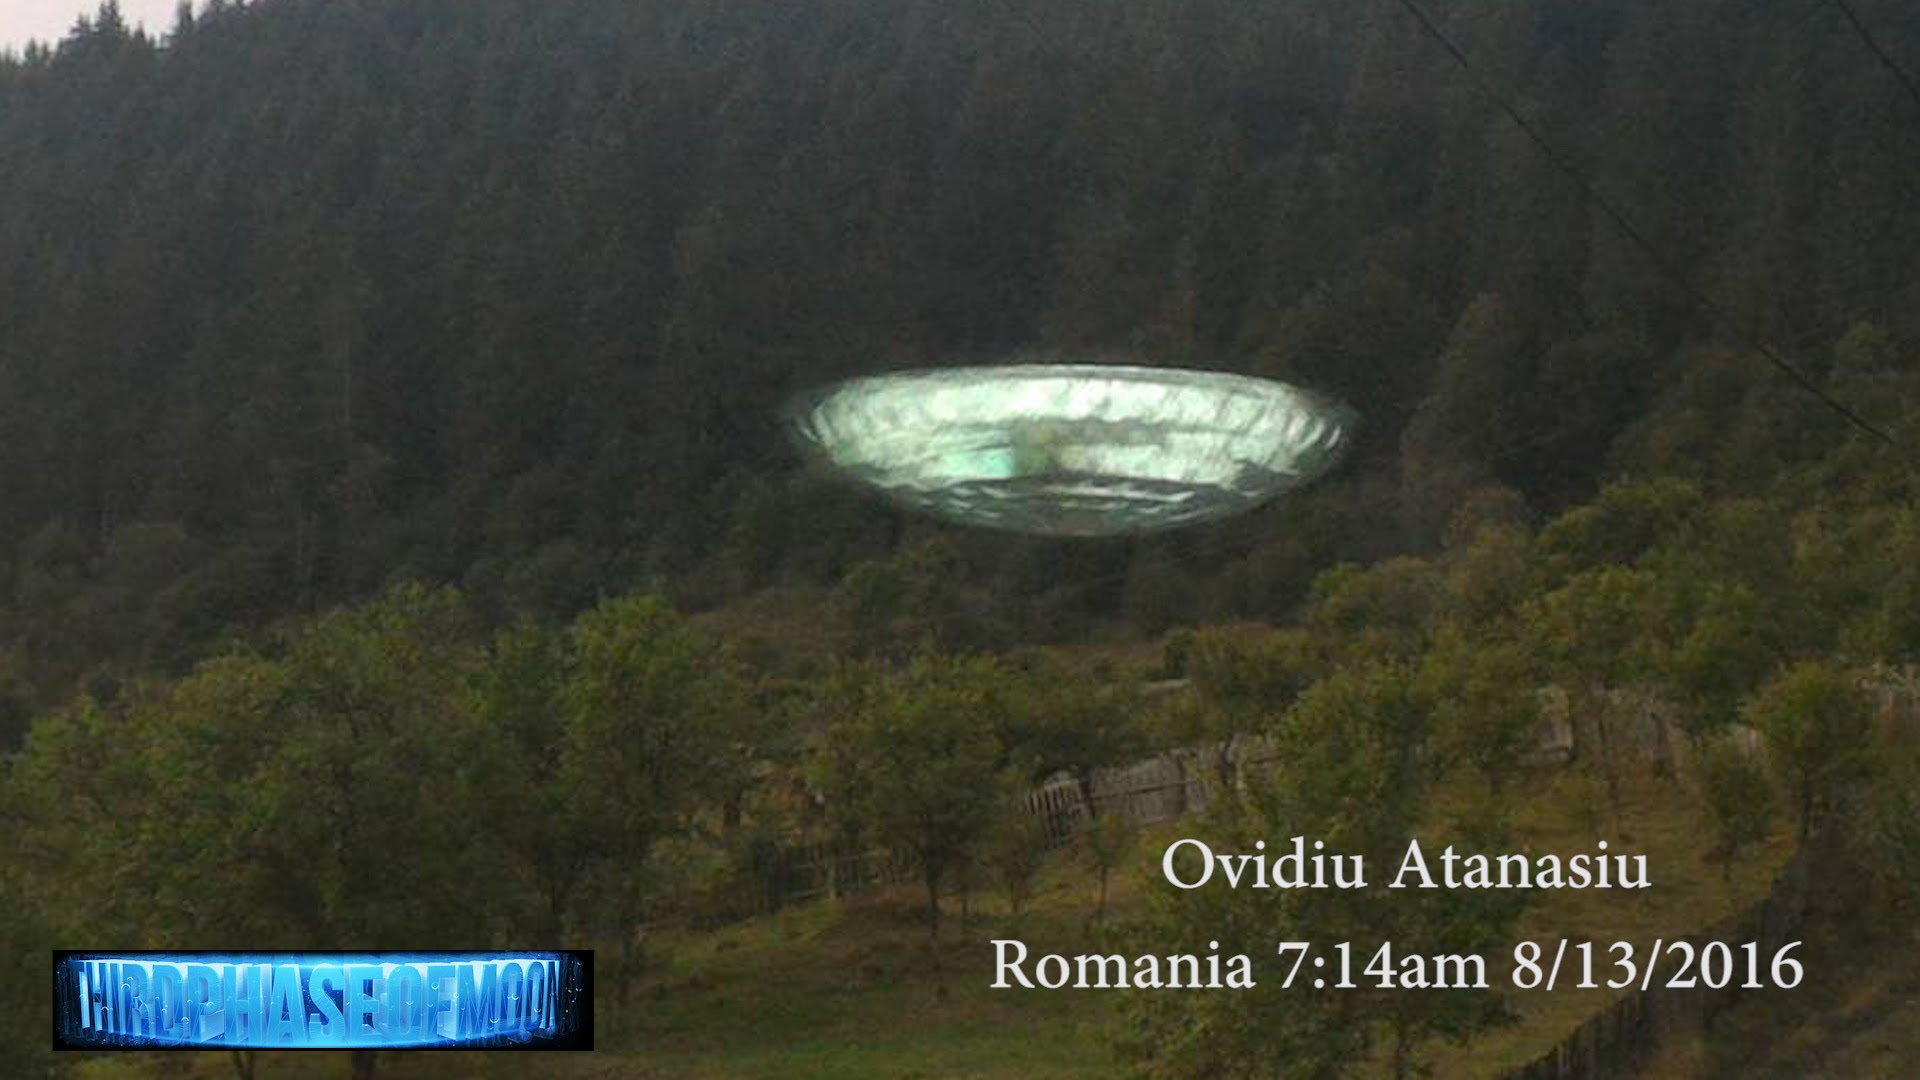 Unexplained Broad Daylight Translucent UFO Romania! VORTEX Russian Portal And Much More! 8/14/2016